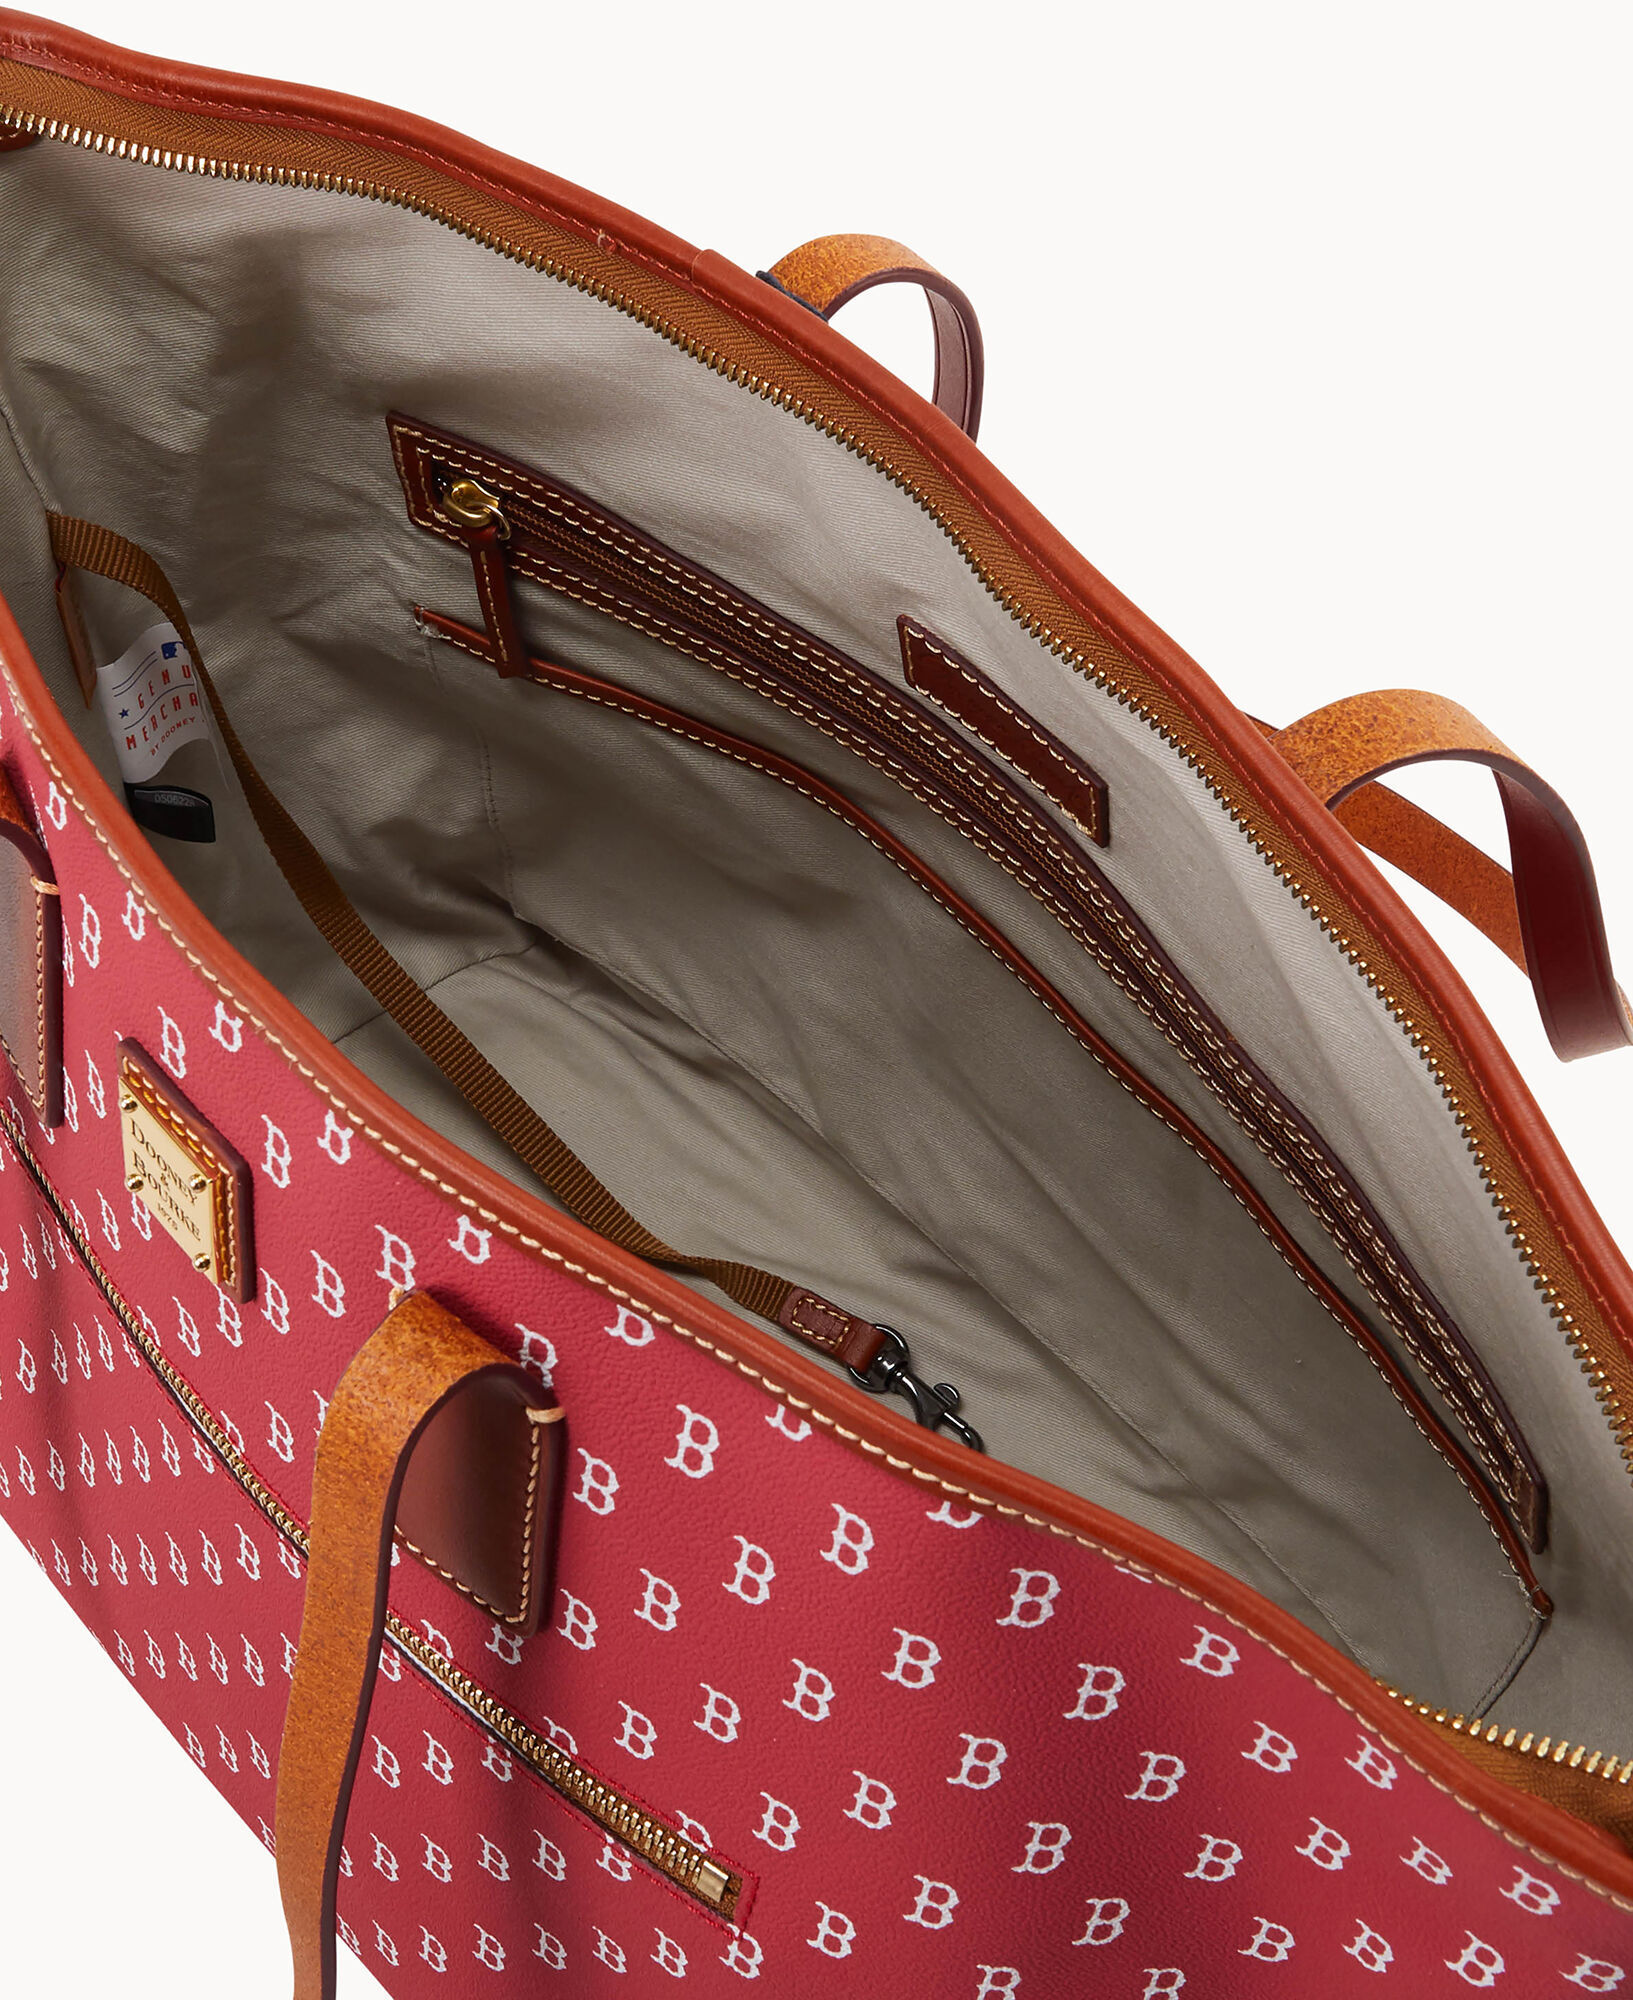 Dooney & Bourke Boston Red Sox Large Tote